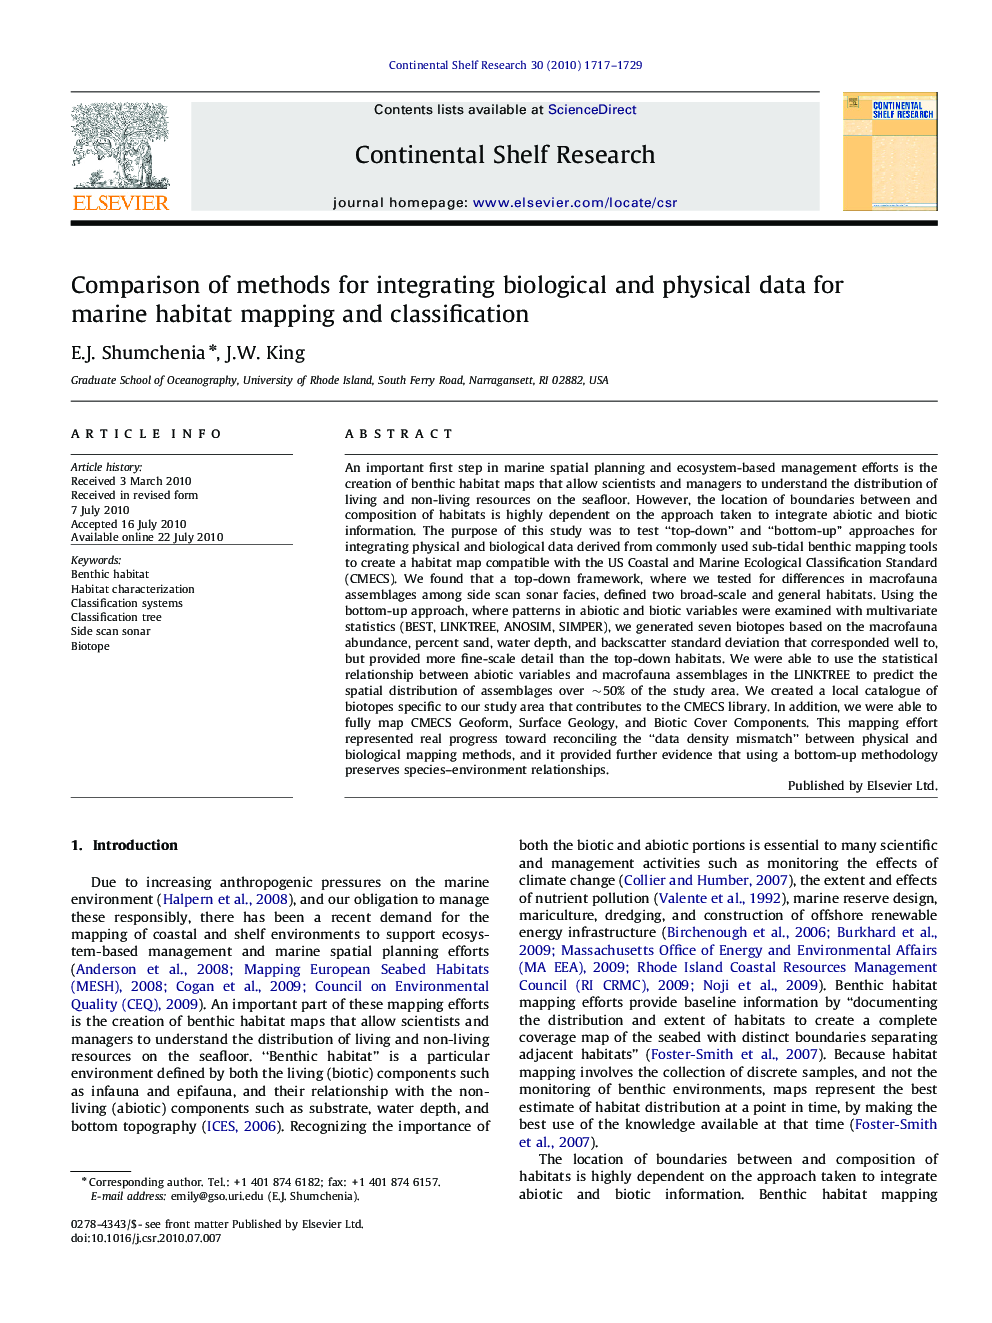 Comparison of methods for integrating biological and physical data for marine habitat mapping and classification